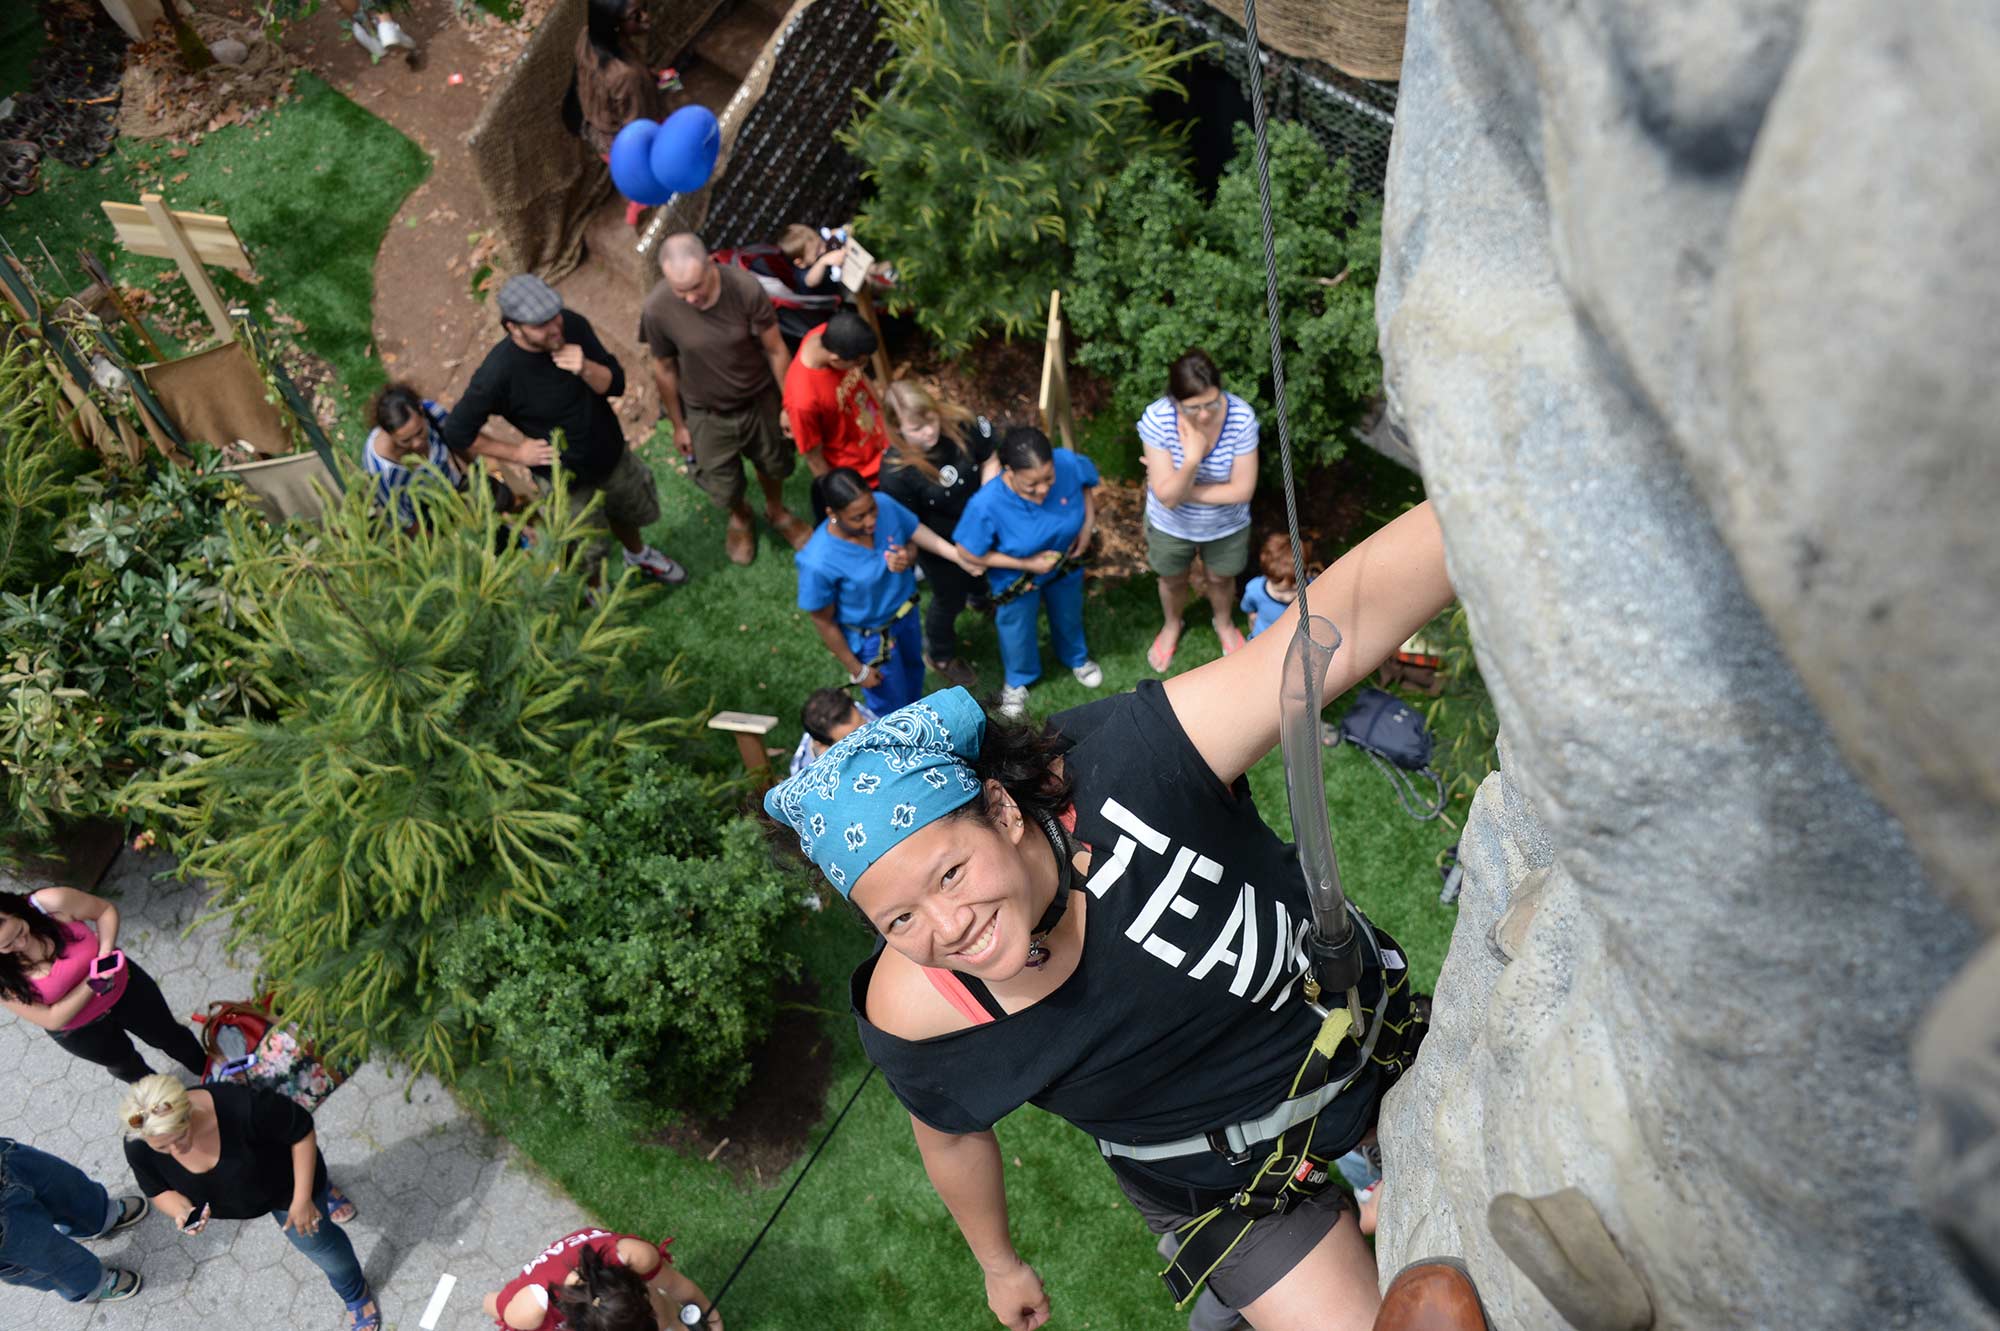 A participant climbs the rock wall at History Channel's Mountain Men City Trek in New York City's Union Square.